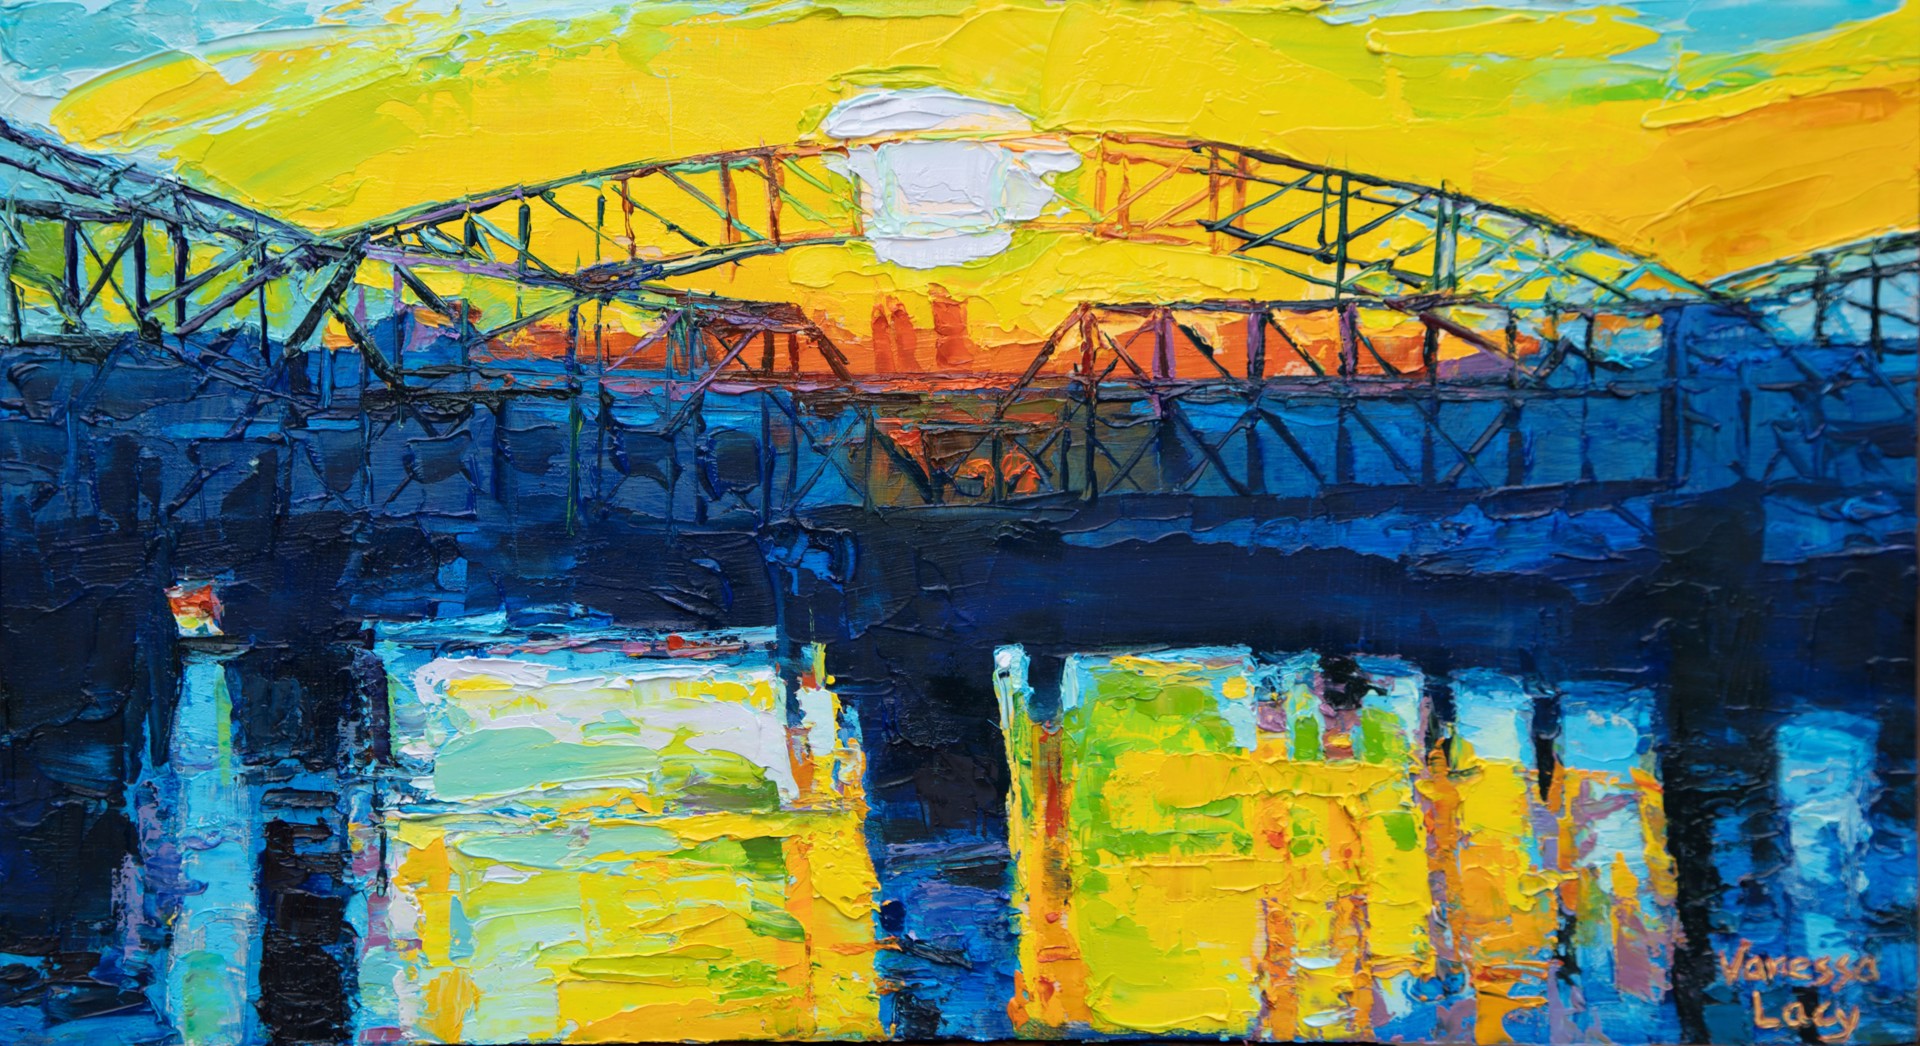 Broadway Bridge, Sunset Spectacle by Vanessa Lacy